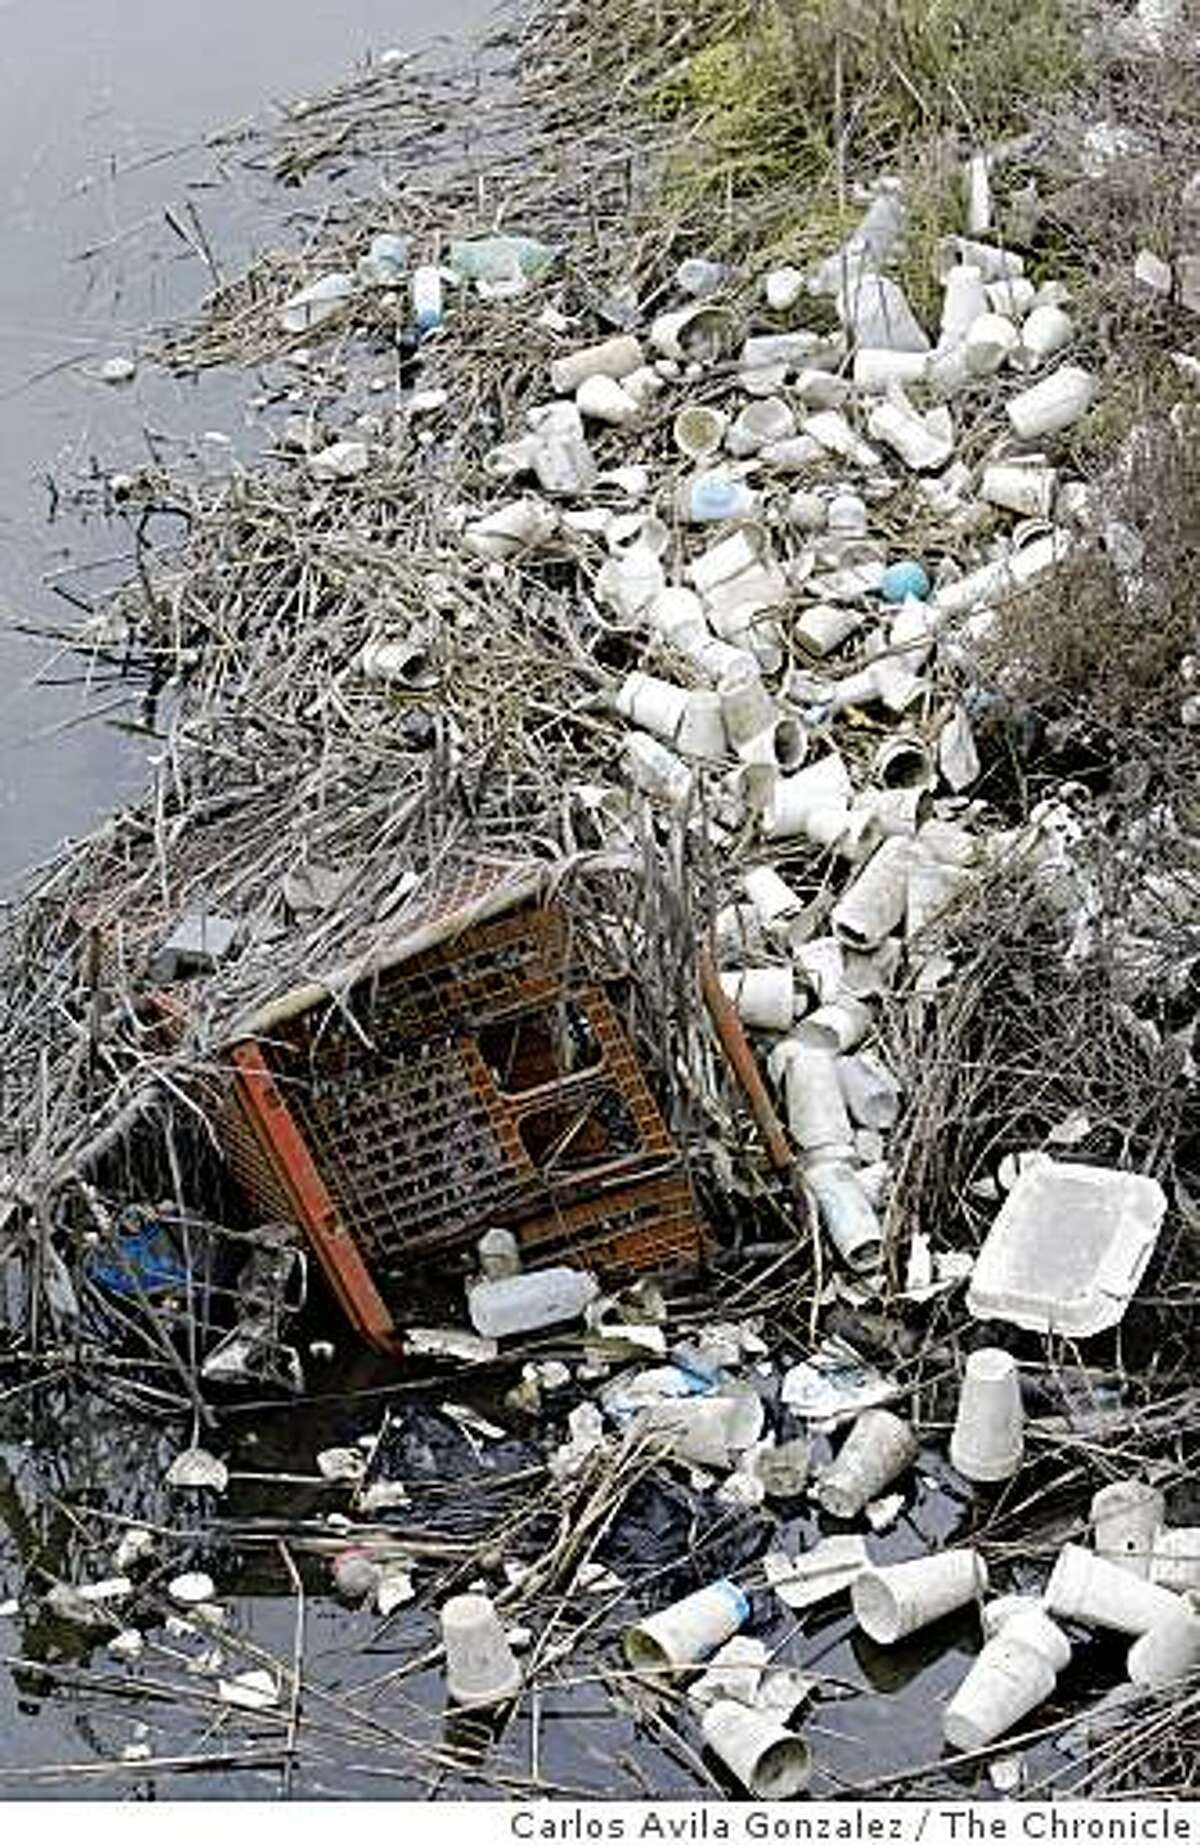 Trash lines the shores of Damon Slough near the McAfee Coliseum and Highway 880 on Wednesday, September 17, 2008. Saturday is the annual Coastal Cleanup day. Save the Bay considers Damon Slough in Oakland to be one of the worst trash hotspots in the Bay Area.